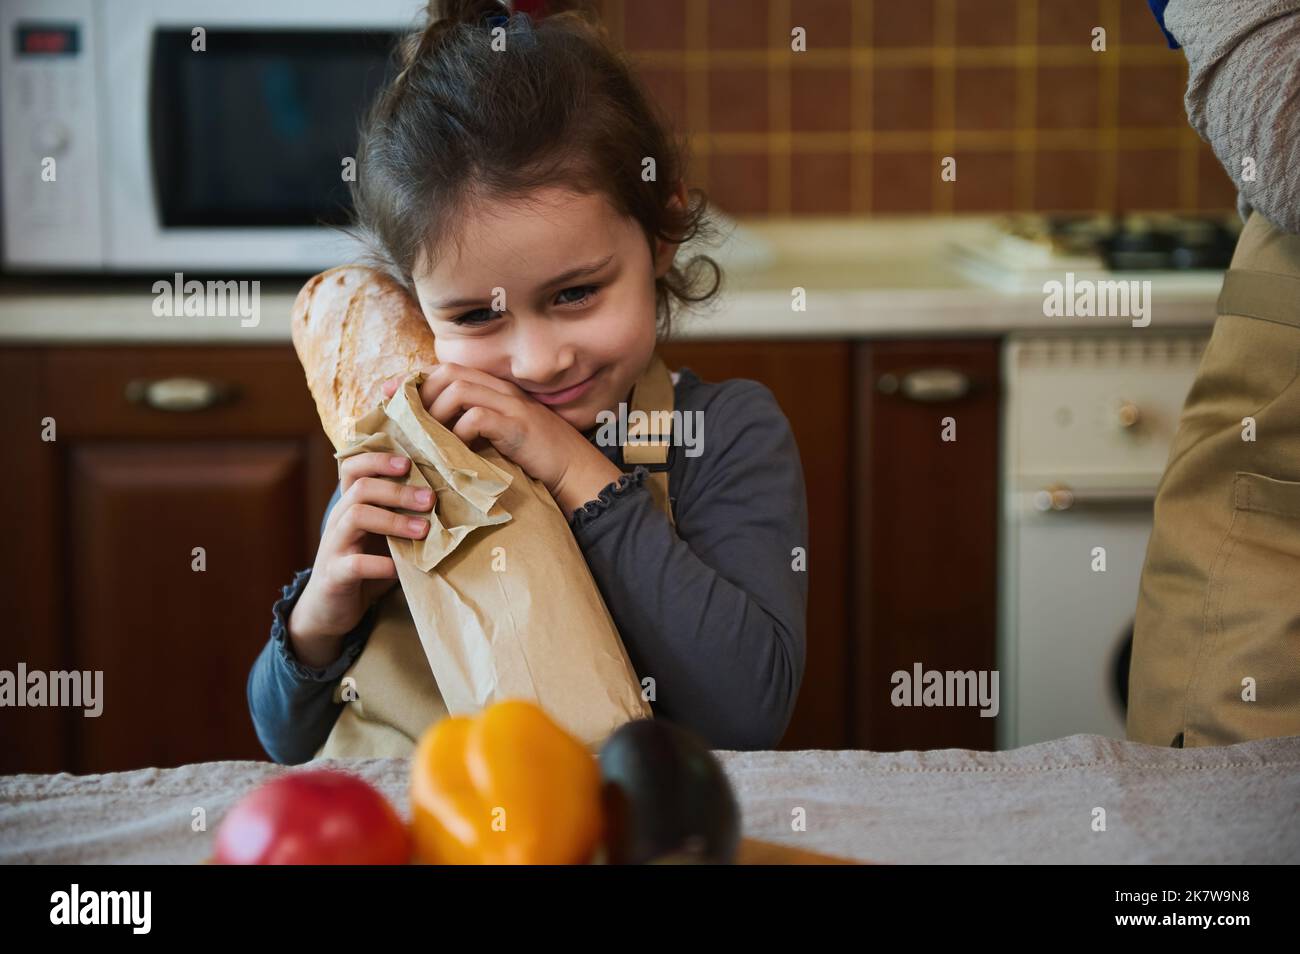 Close-up portrait of a cute little girl hugging a loaf of sourdough bread from family bakery while unpacking grocery bag Stock Photo